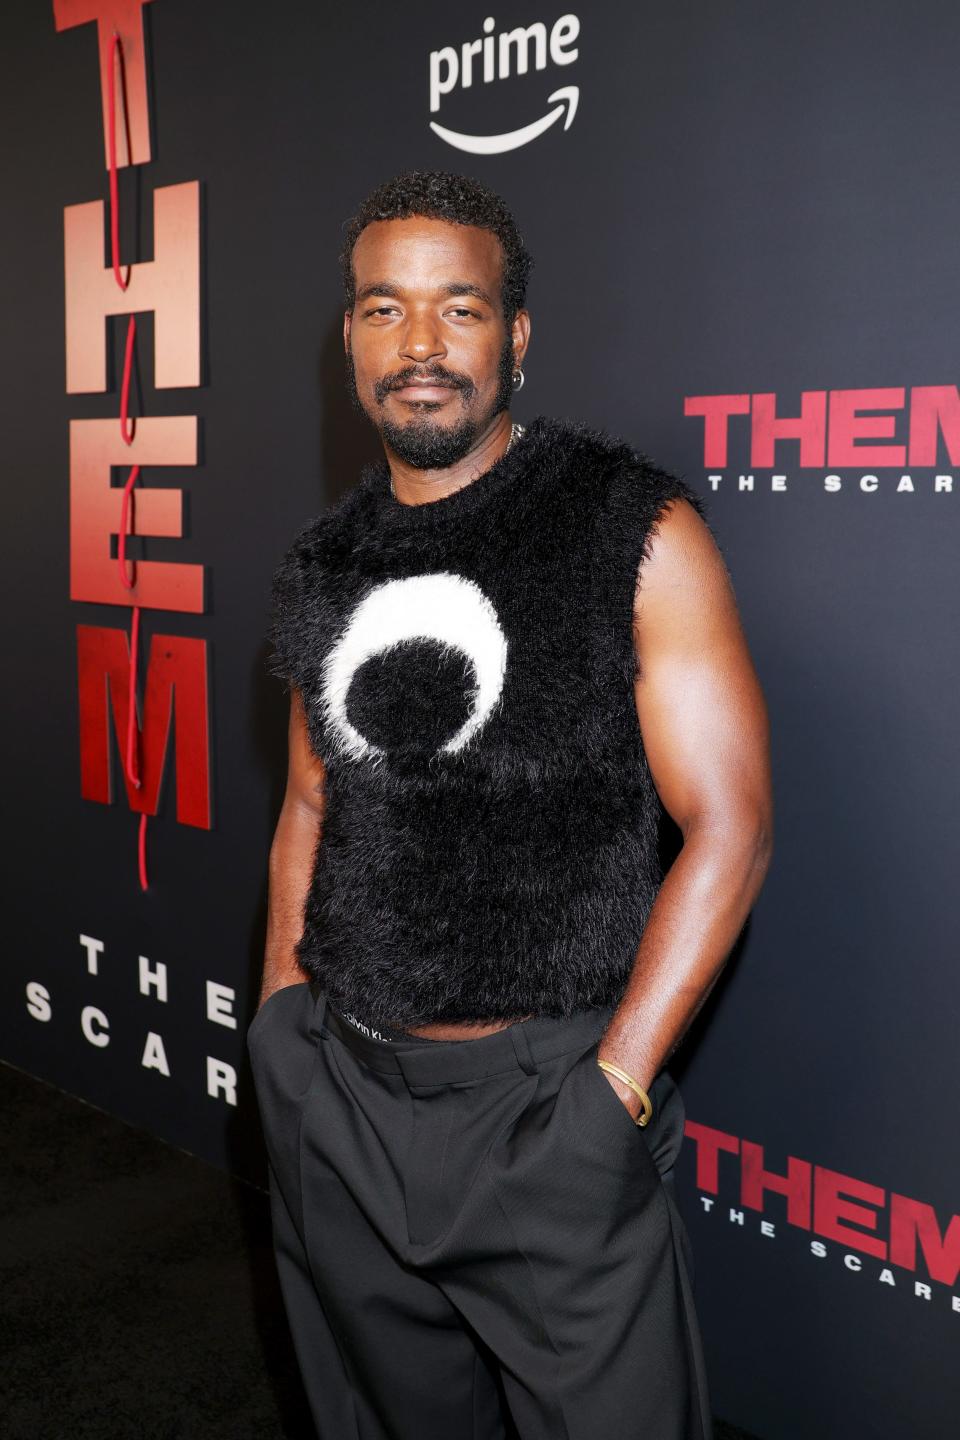 Luke James attends as Prime Video hosts special screening for "Them: The Scare" at Culver Theater on April 23, 2024 in Culver City, California.